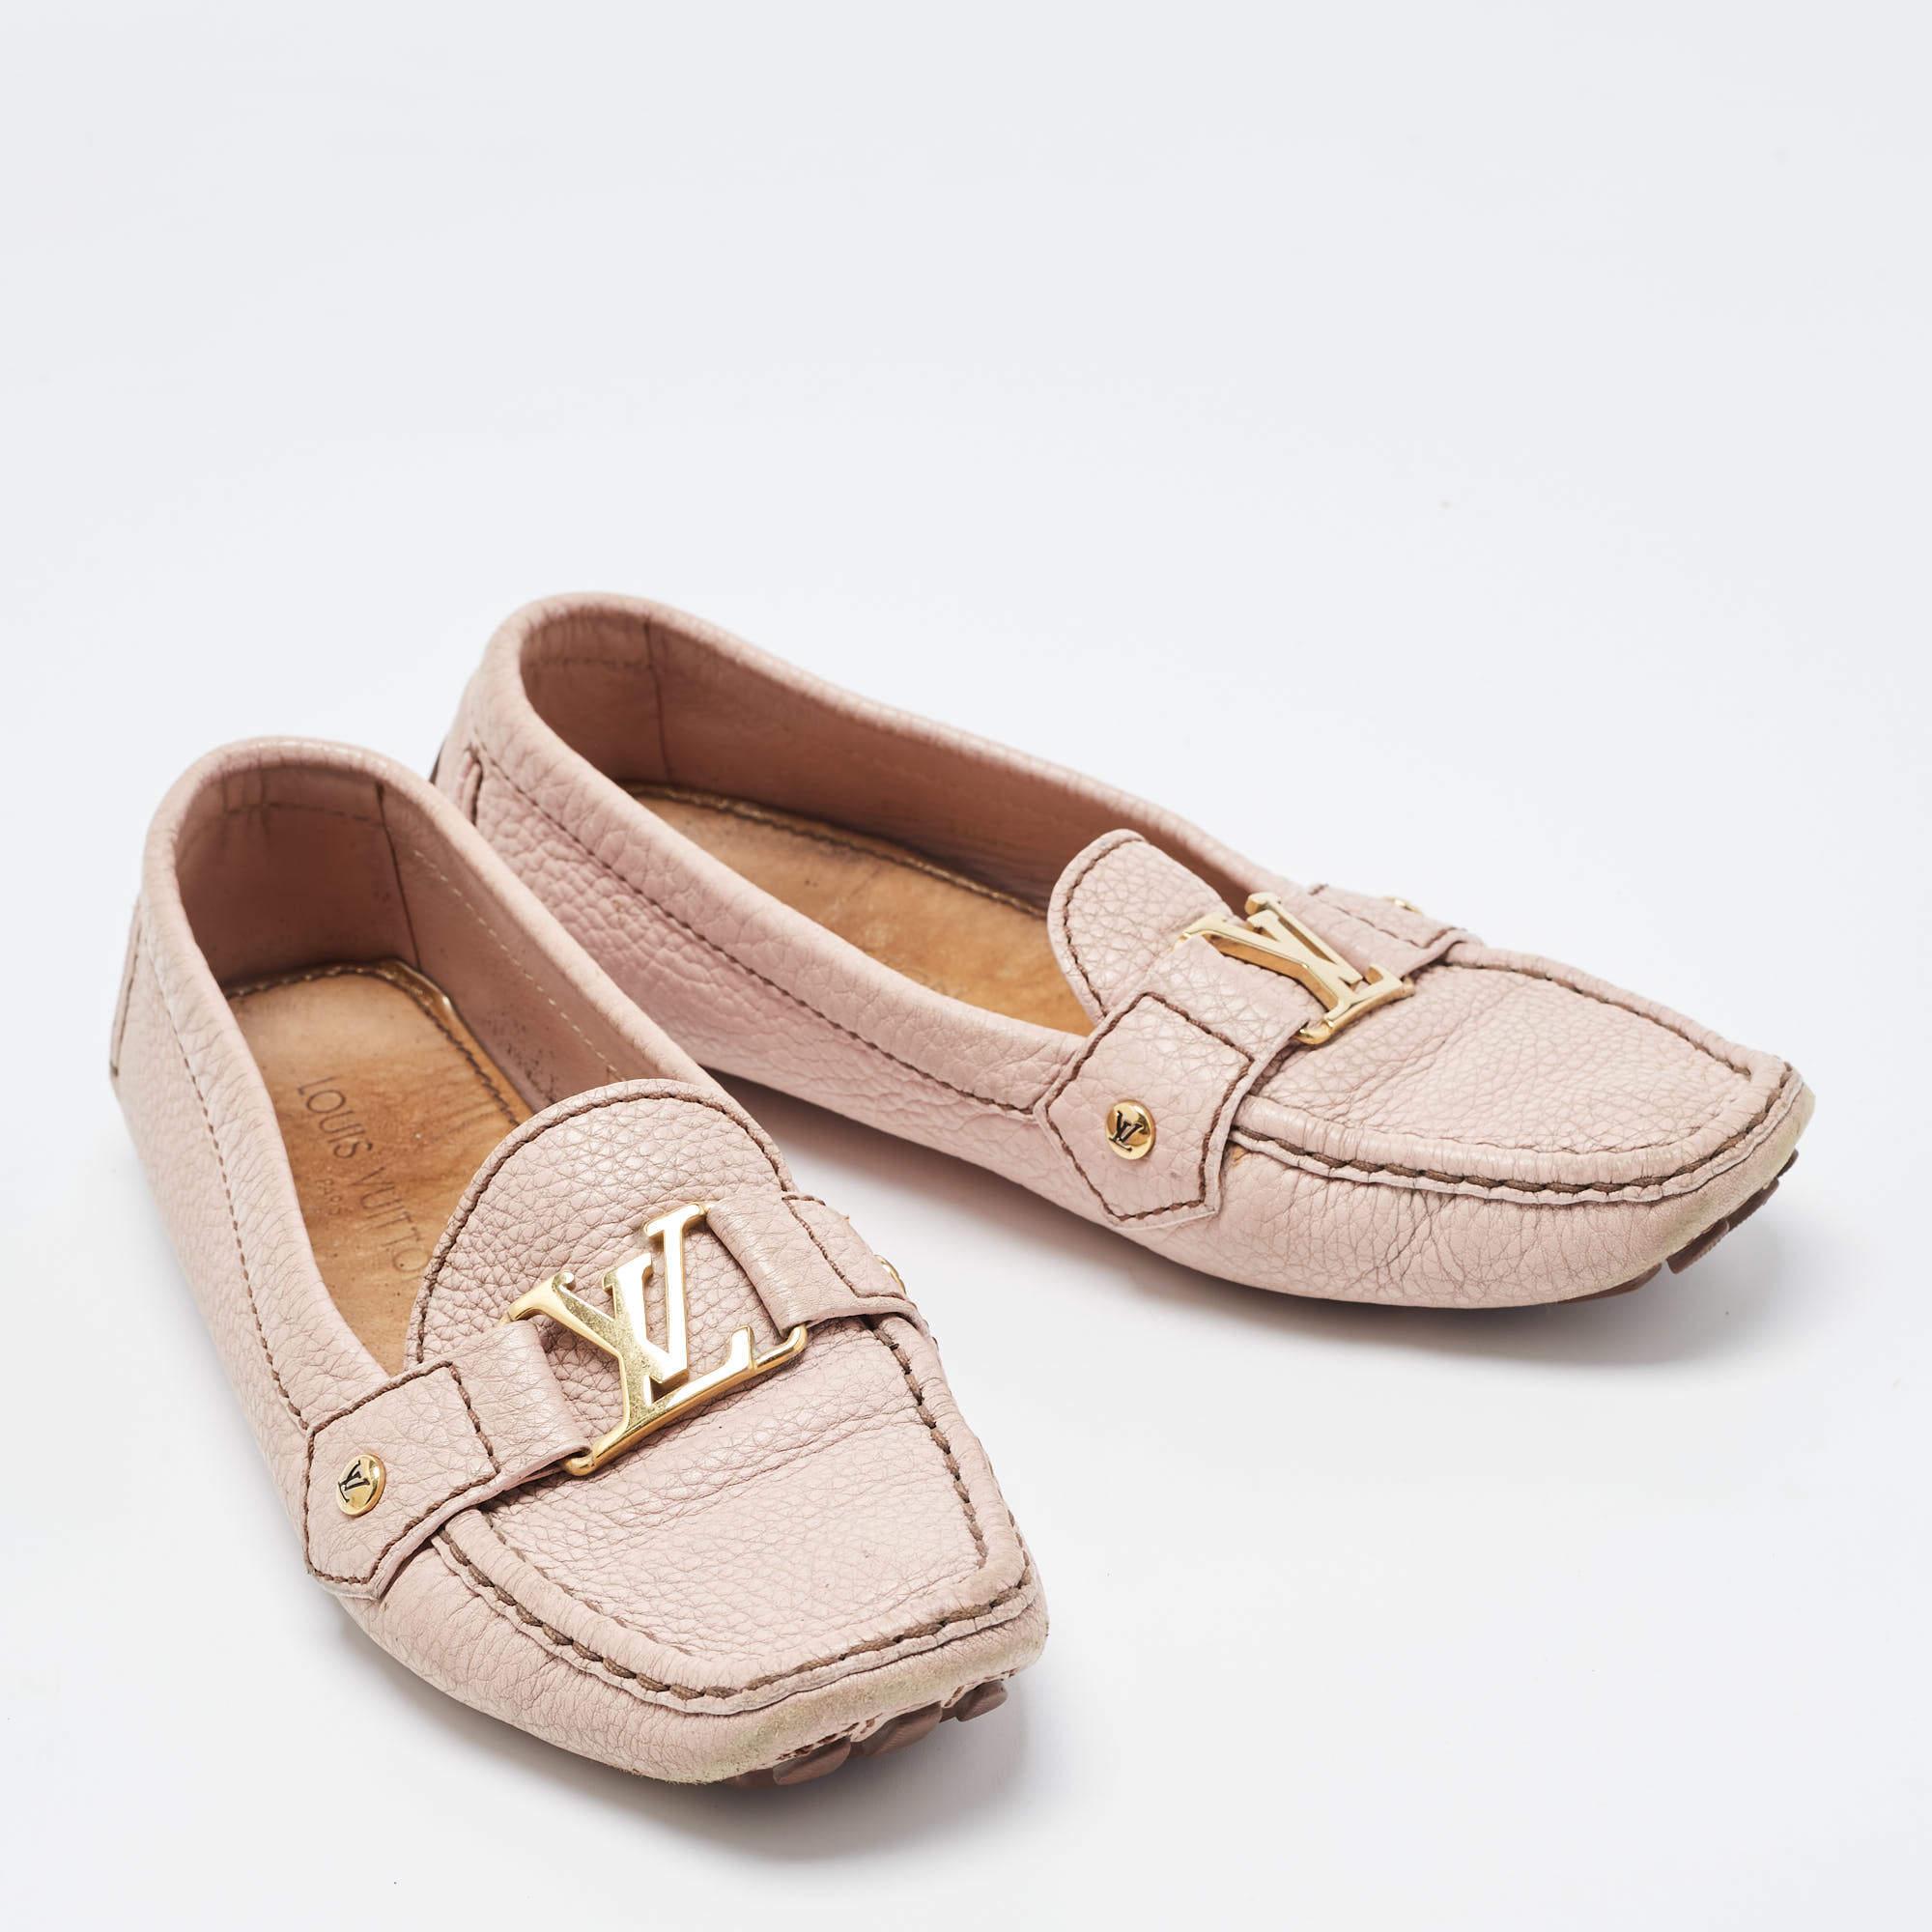 Louis Vuitton Pink Leather Oxford Loafers Size 38 In Good Condition For Sale In Dubai, Al Qouz 2